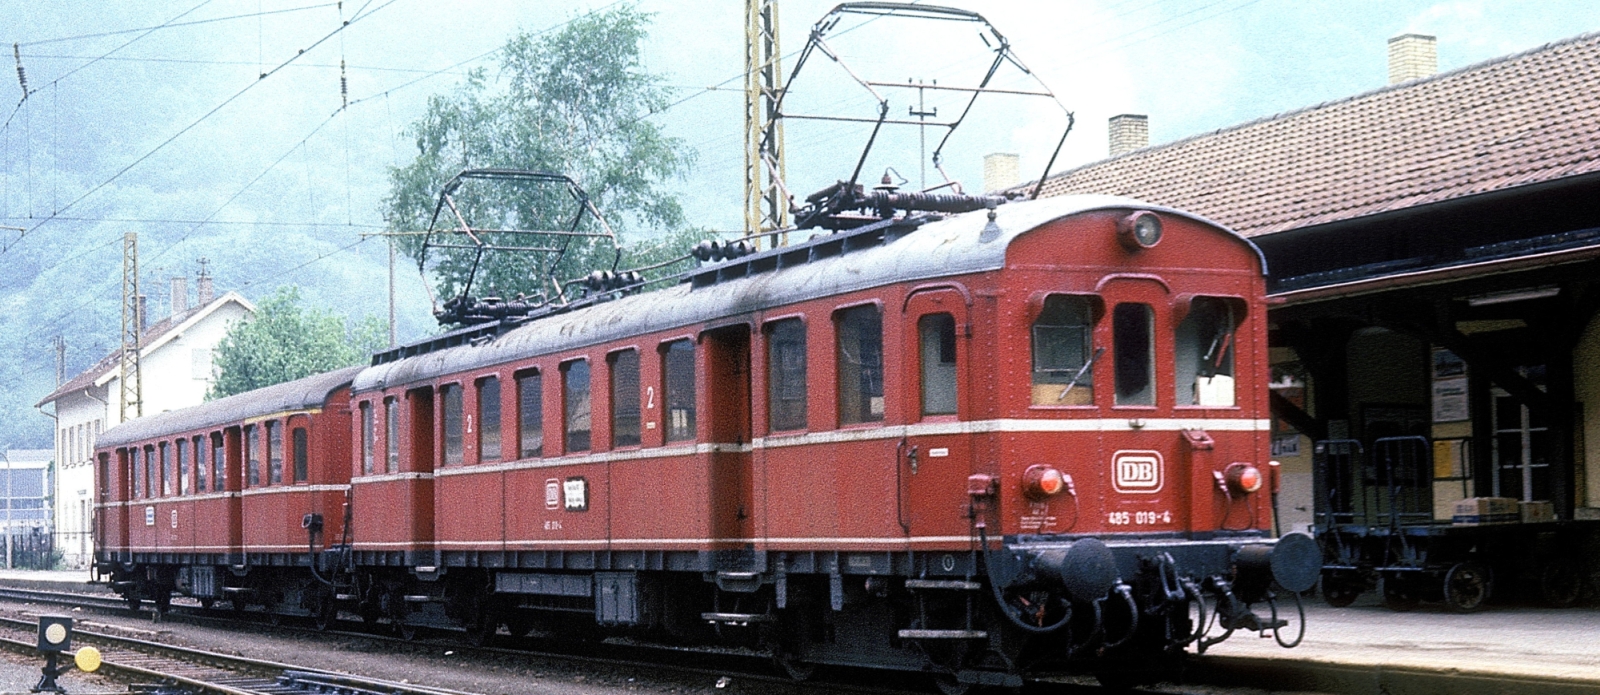 485 019 with control car 885 709 in May 1975 in Zell im Wiesental